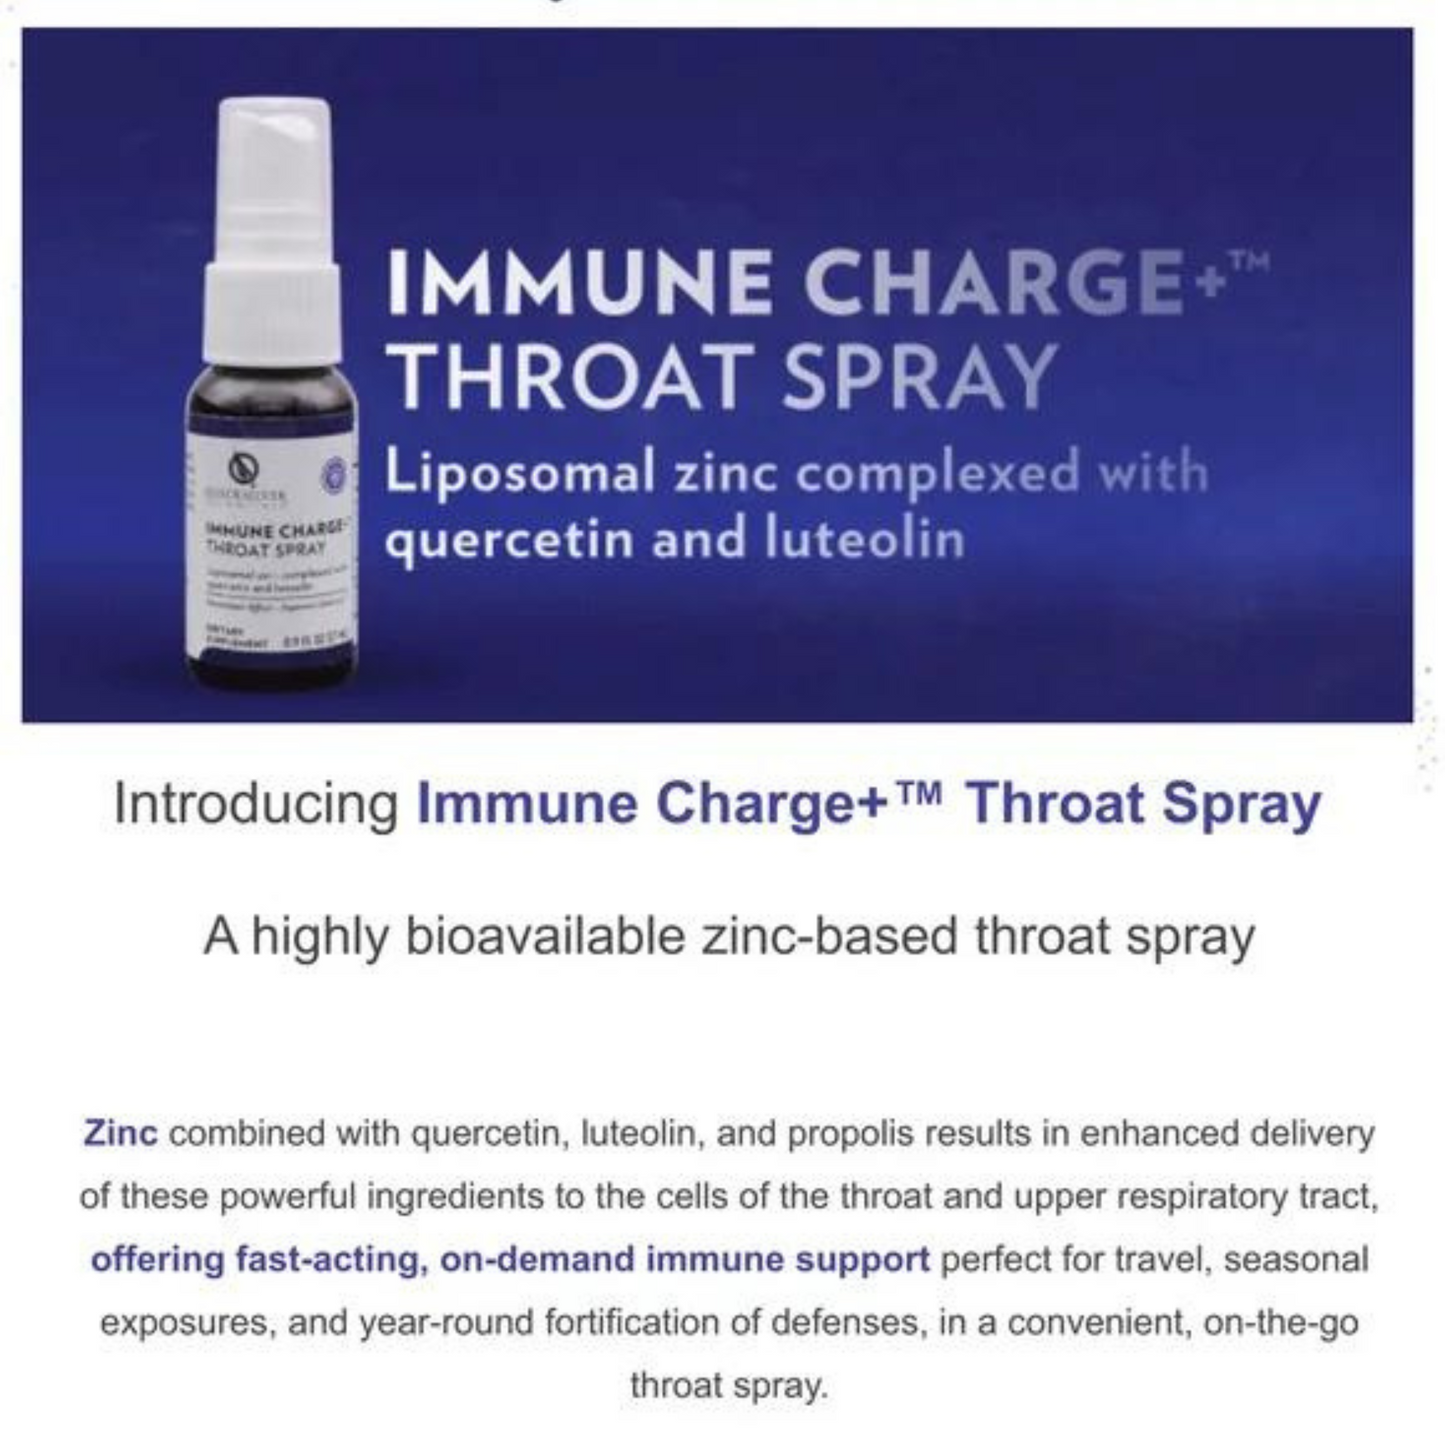 Immune Charge+ Throat Spray by Quicksilver Scientific